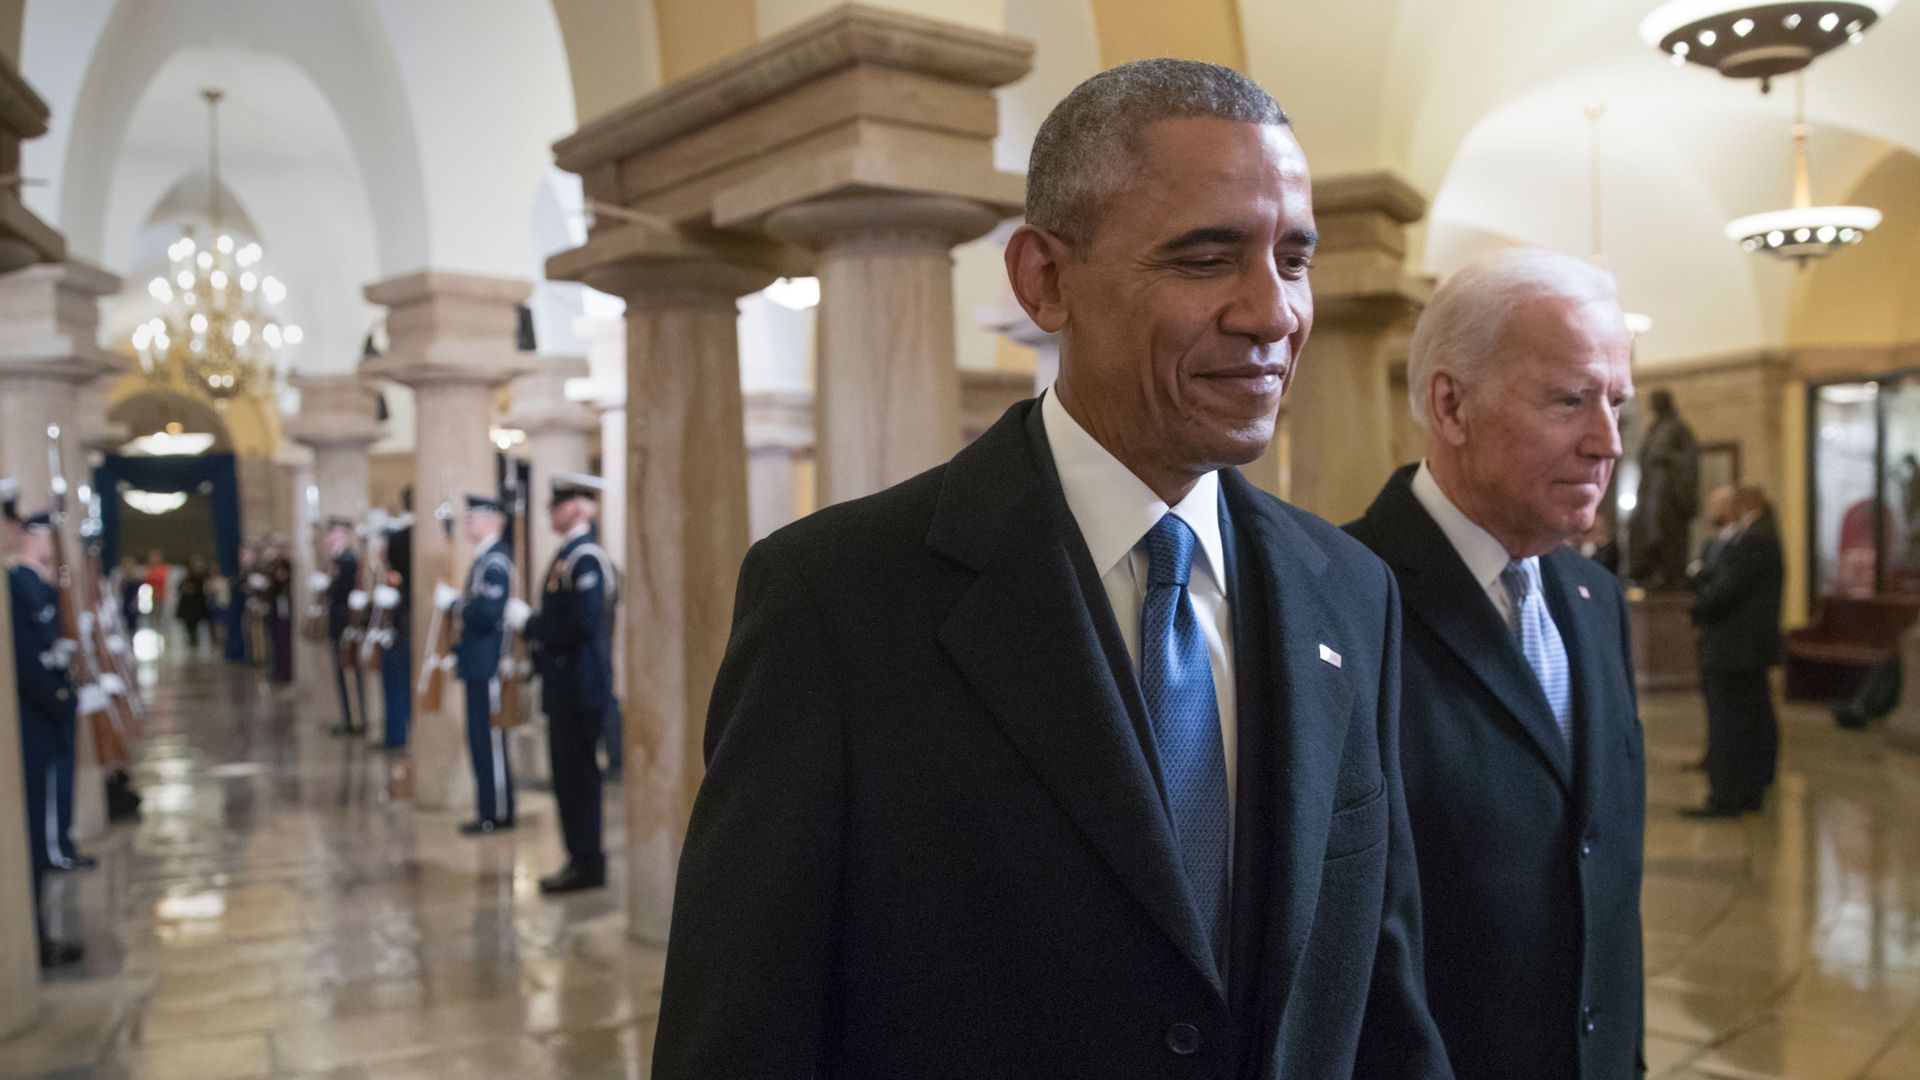 t Barack Obama and Vice President Joe Biden walk through the Crypt of the Capitol